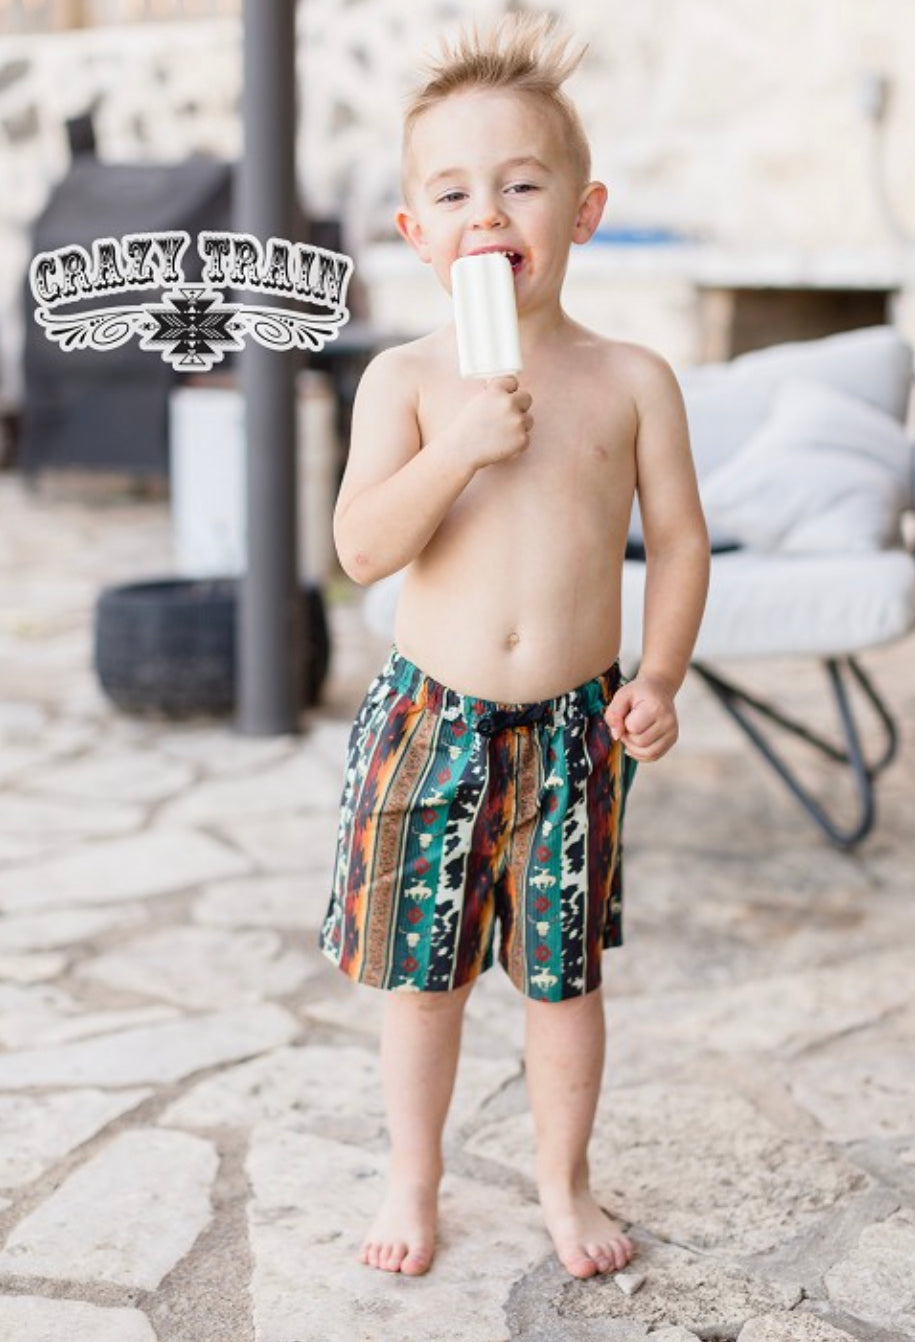 Raise Them Western Kids Shorts - Forever Western Boutique